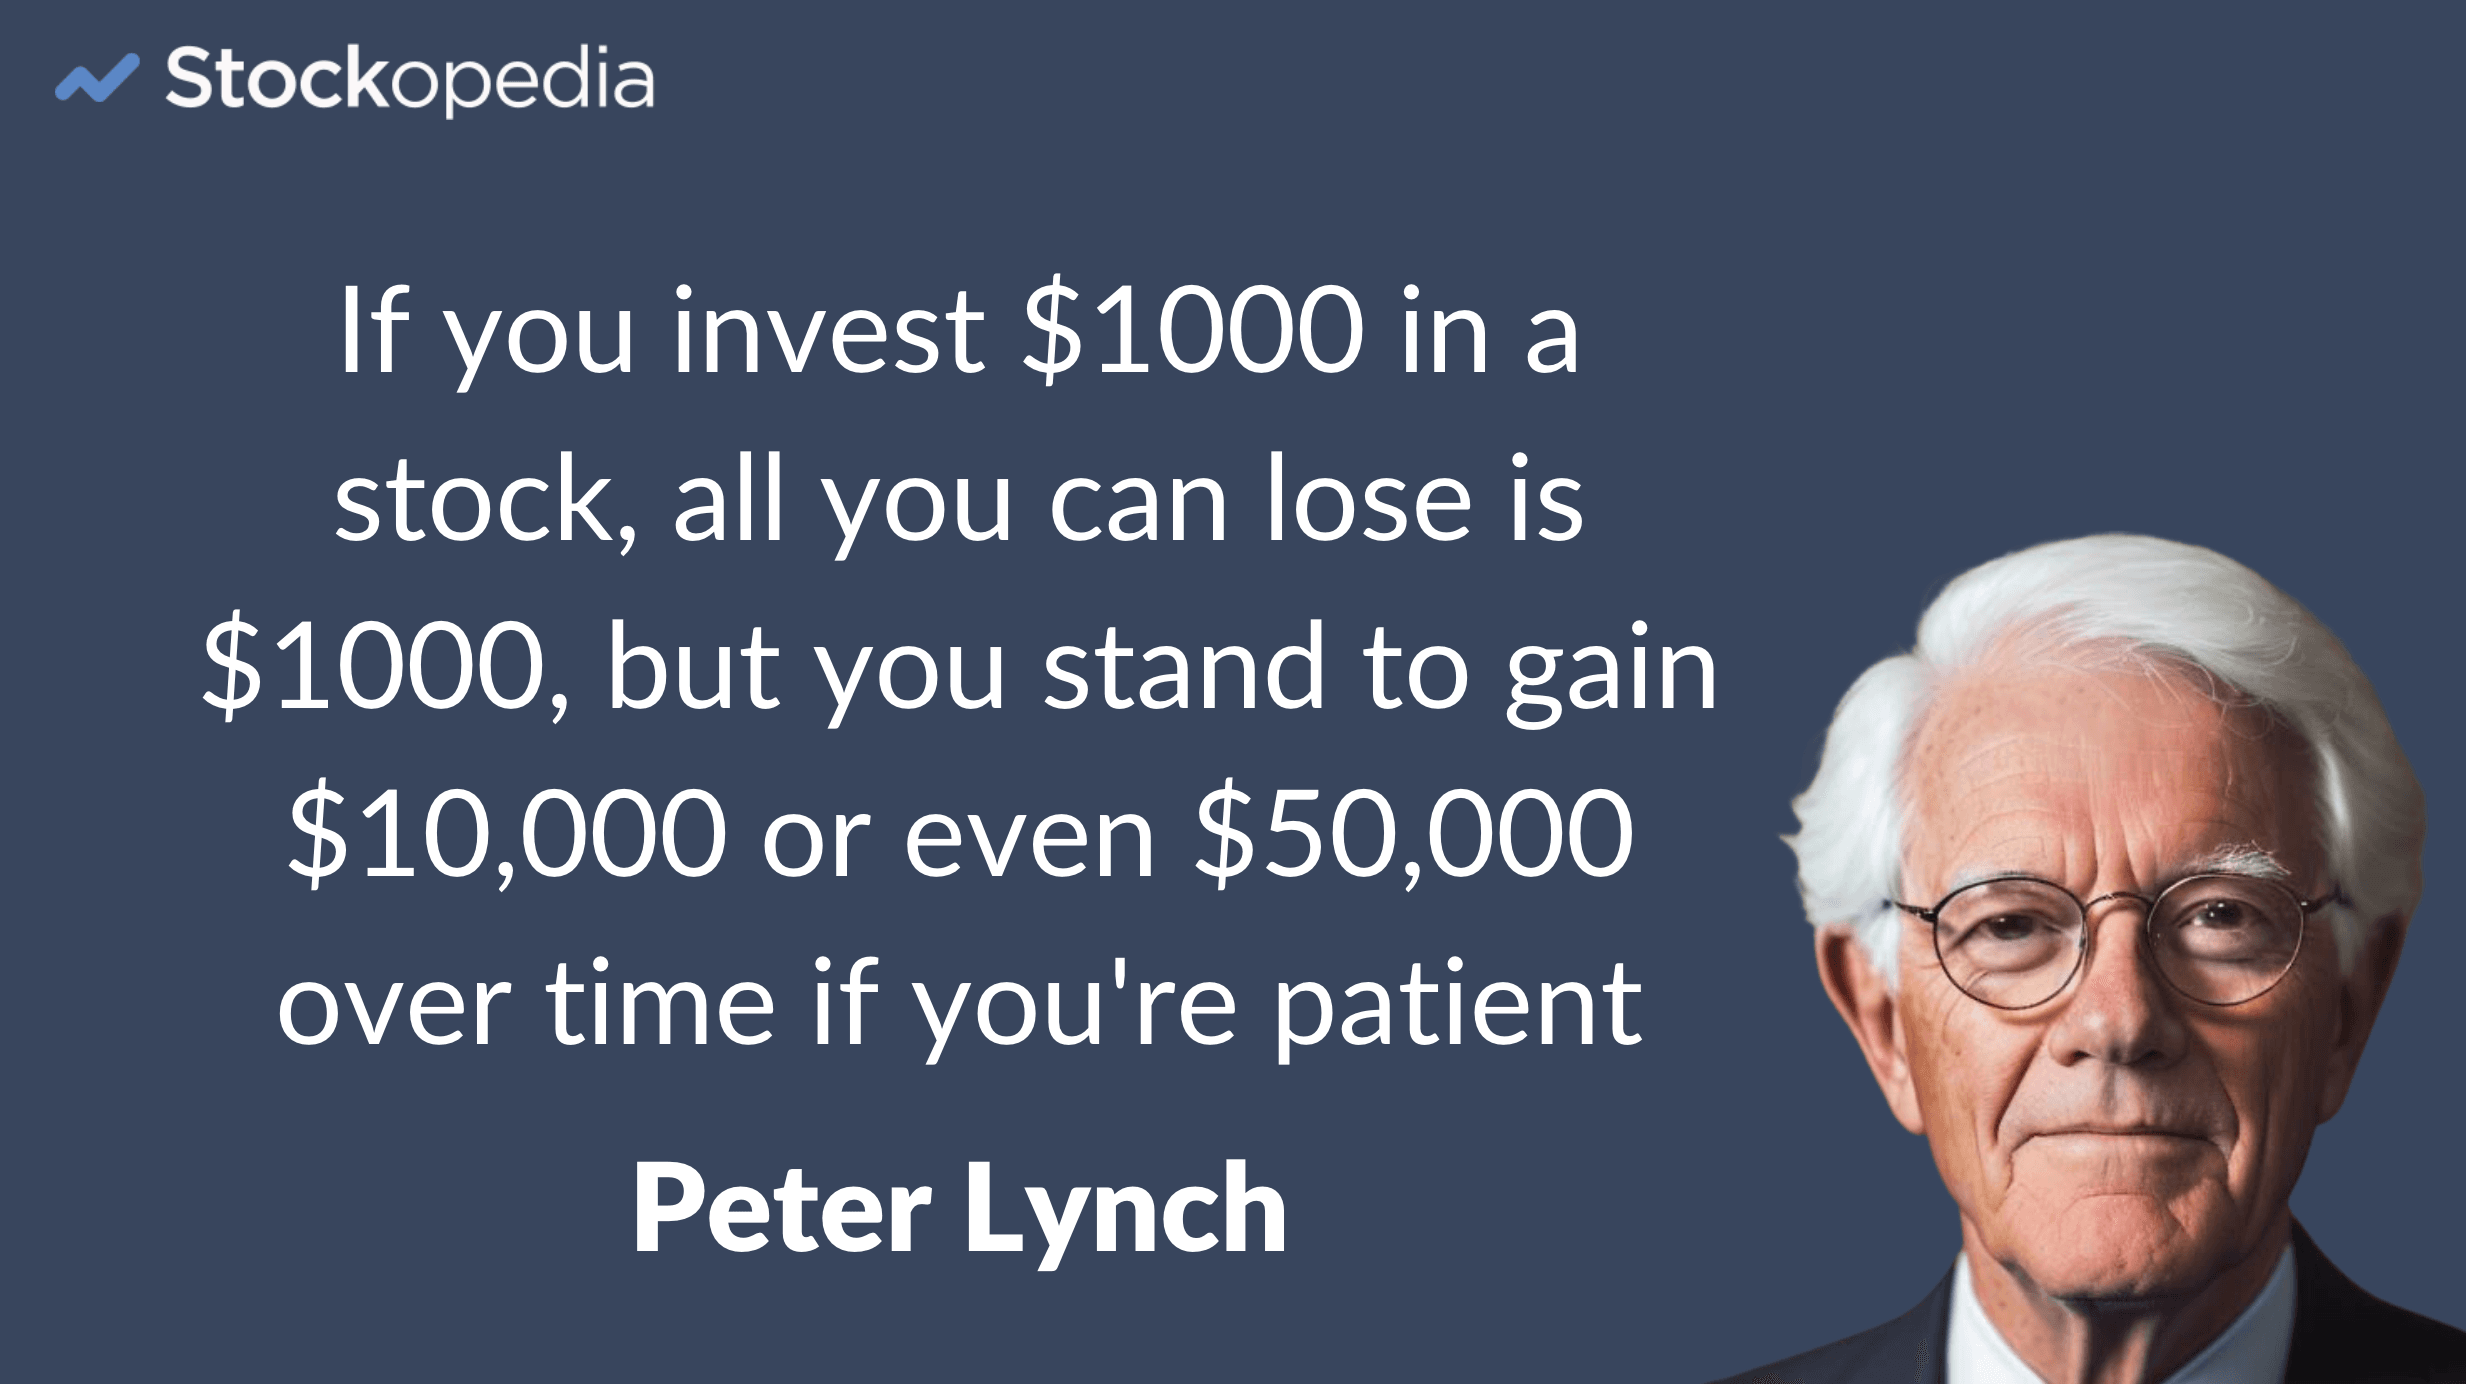 Quote - Peter Lynch - invest $1000 in a stock